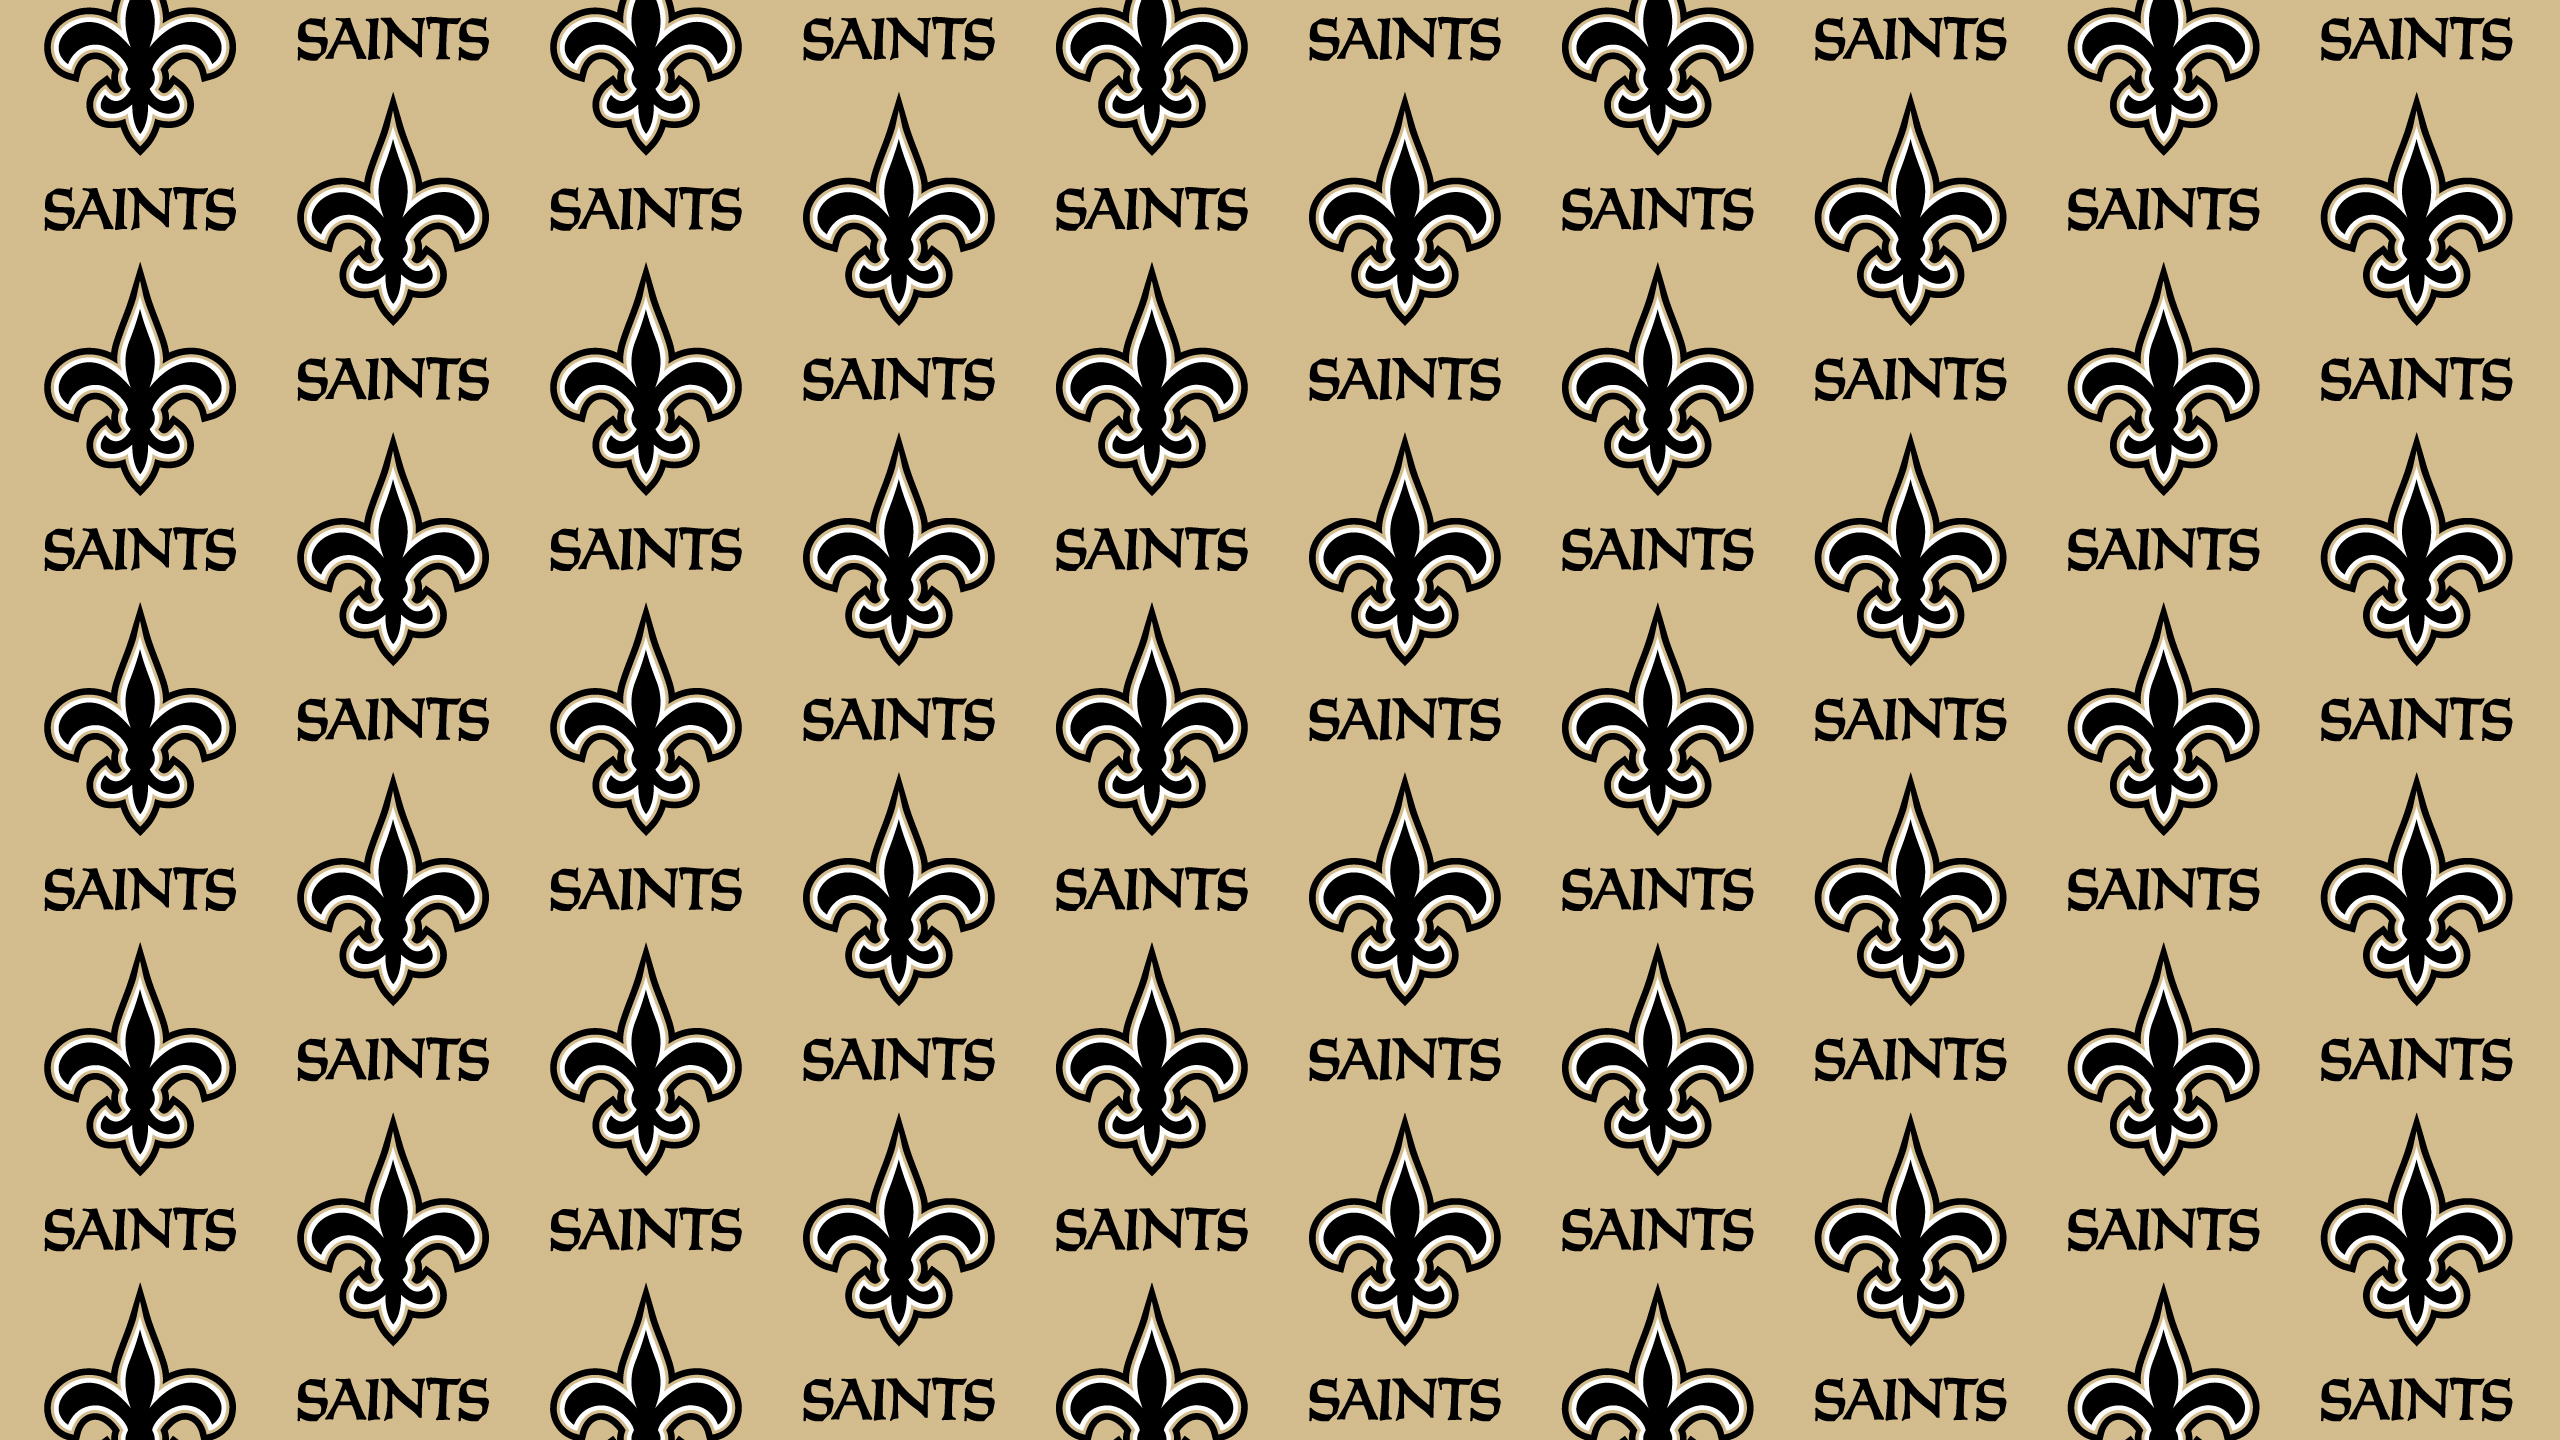 Video Conference Background For Saints Fans Working Remotely